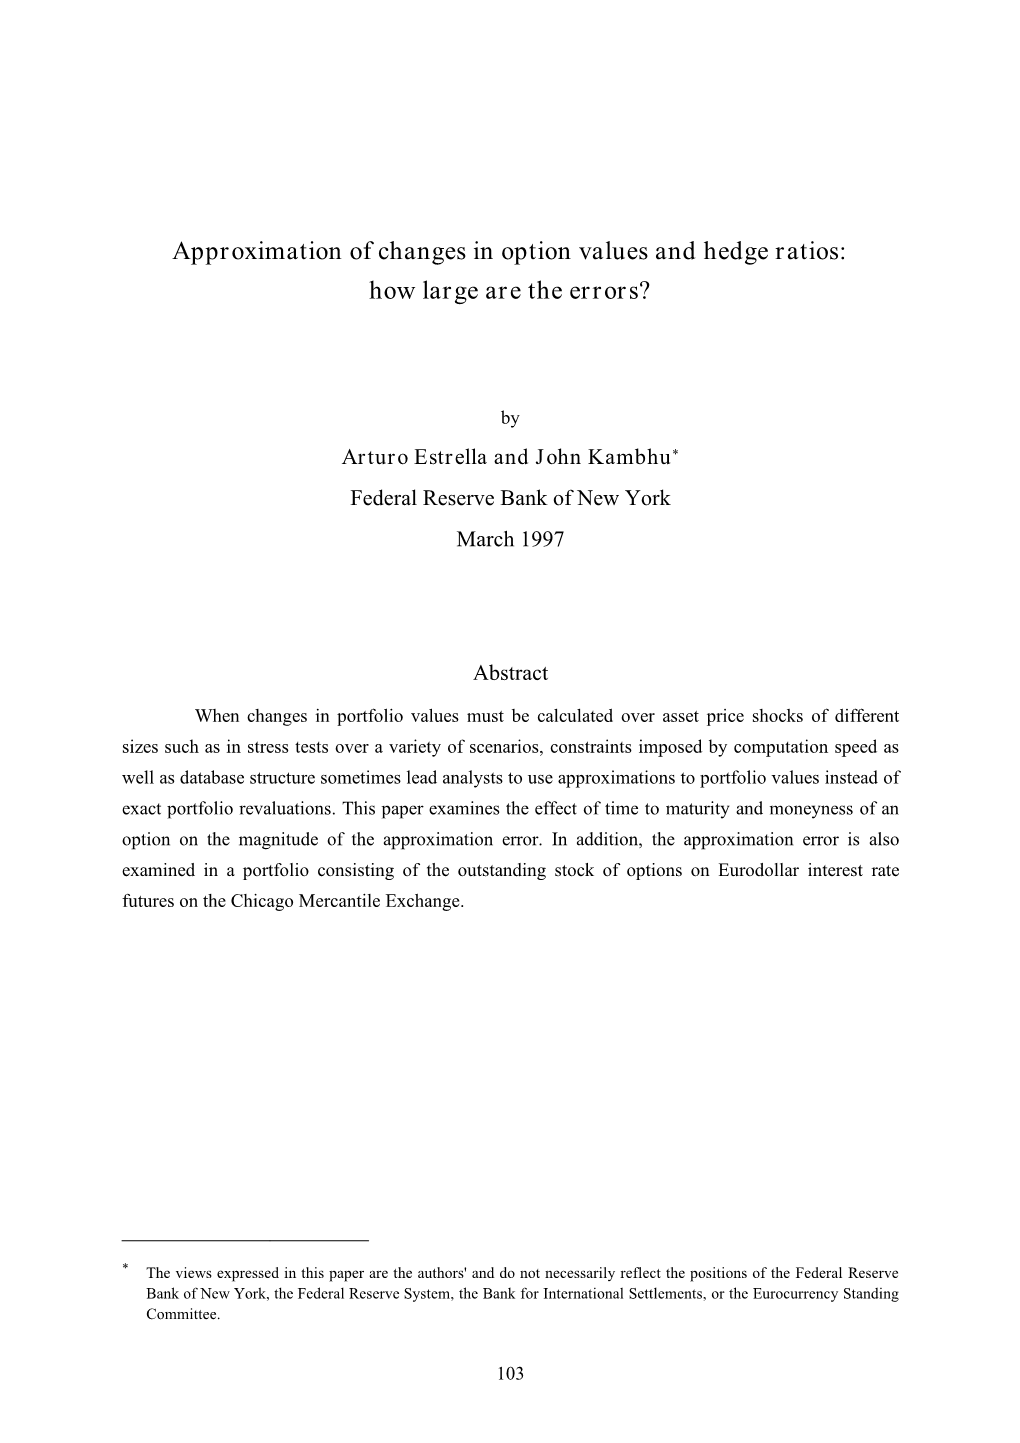 Approximation of Changes in Option Values and Hedge Ratios: How Large Are the Errors?